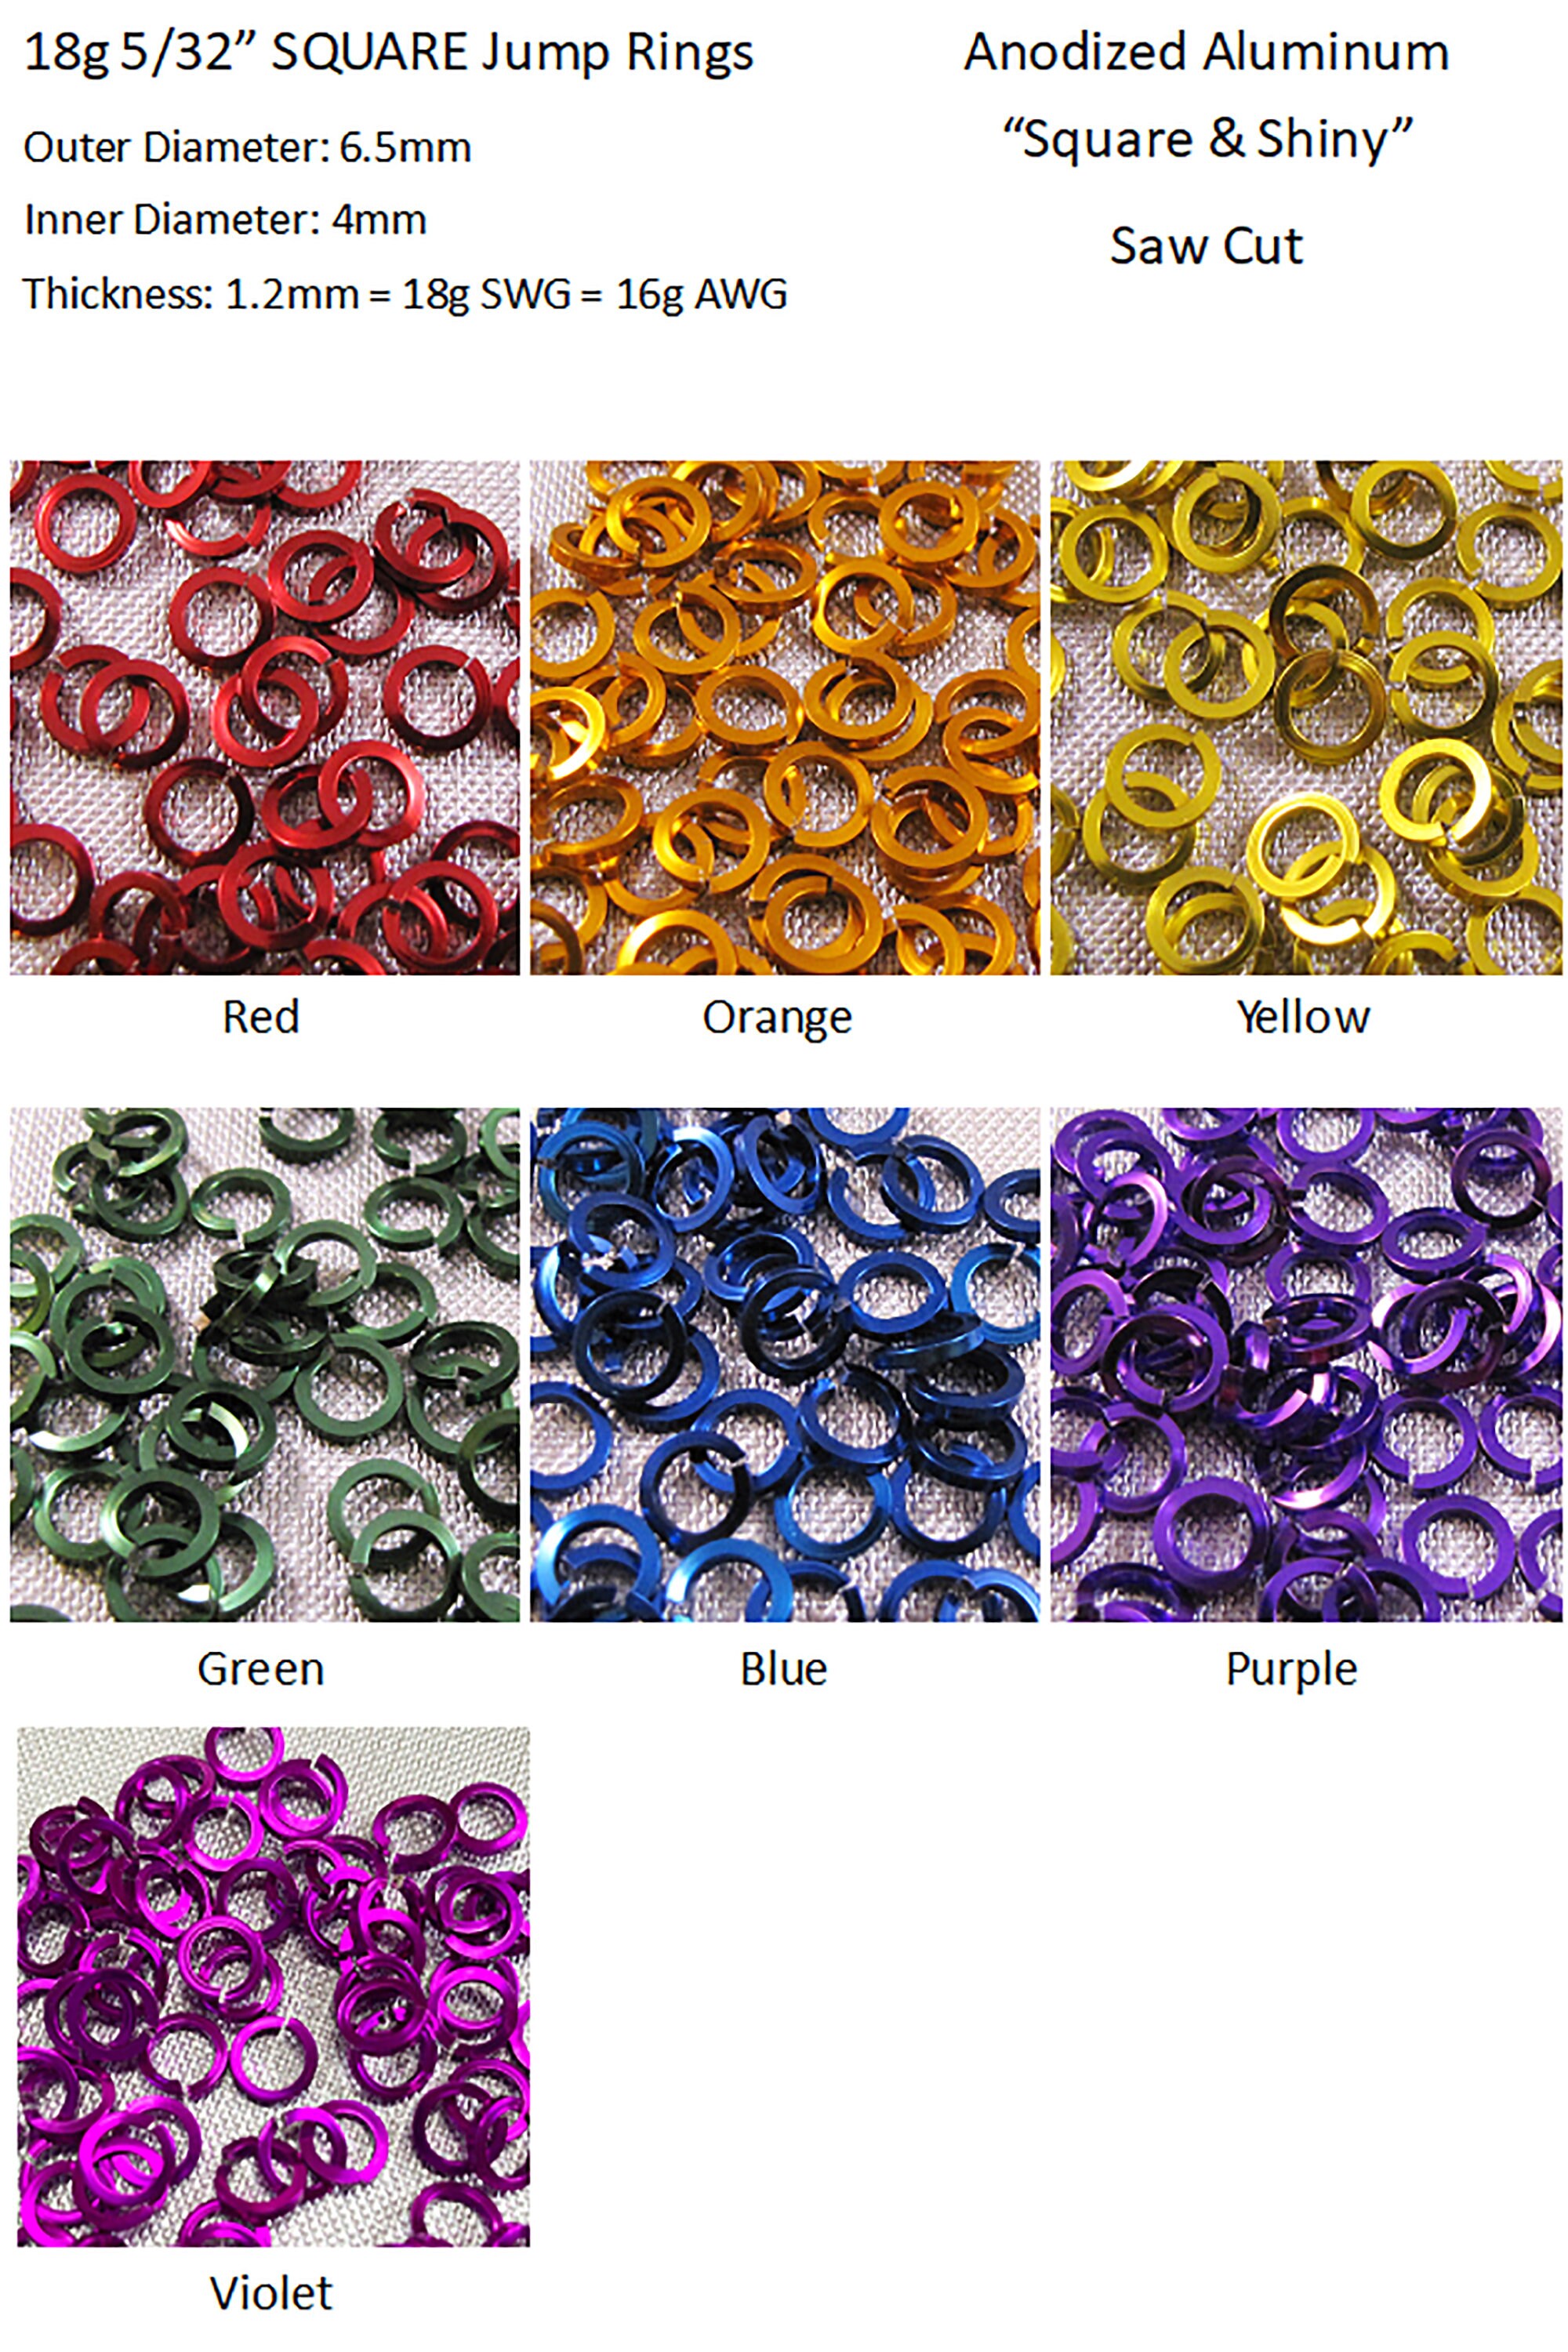 144 Pieces Heavy Weight 6mm 18 Gauge Base Metal Open Jump Ring Charm Links Jewelry  Making Supplies Metal Findings 